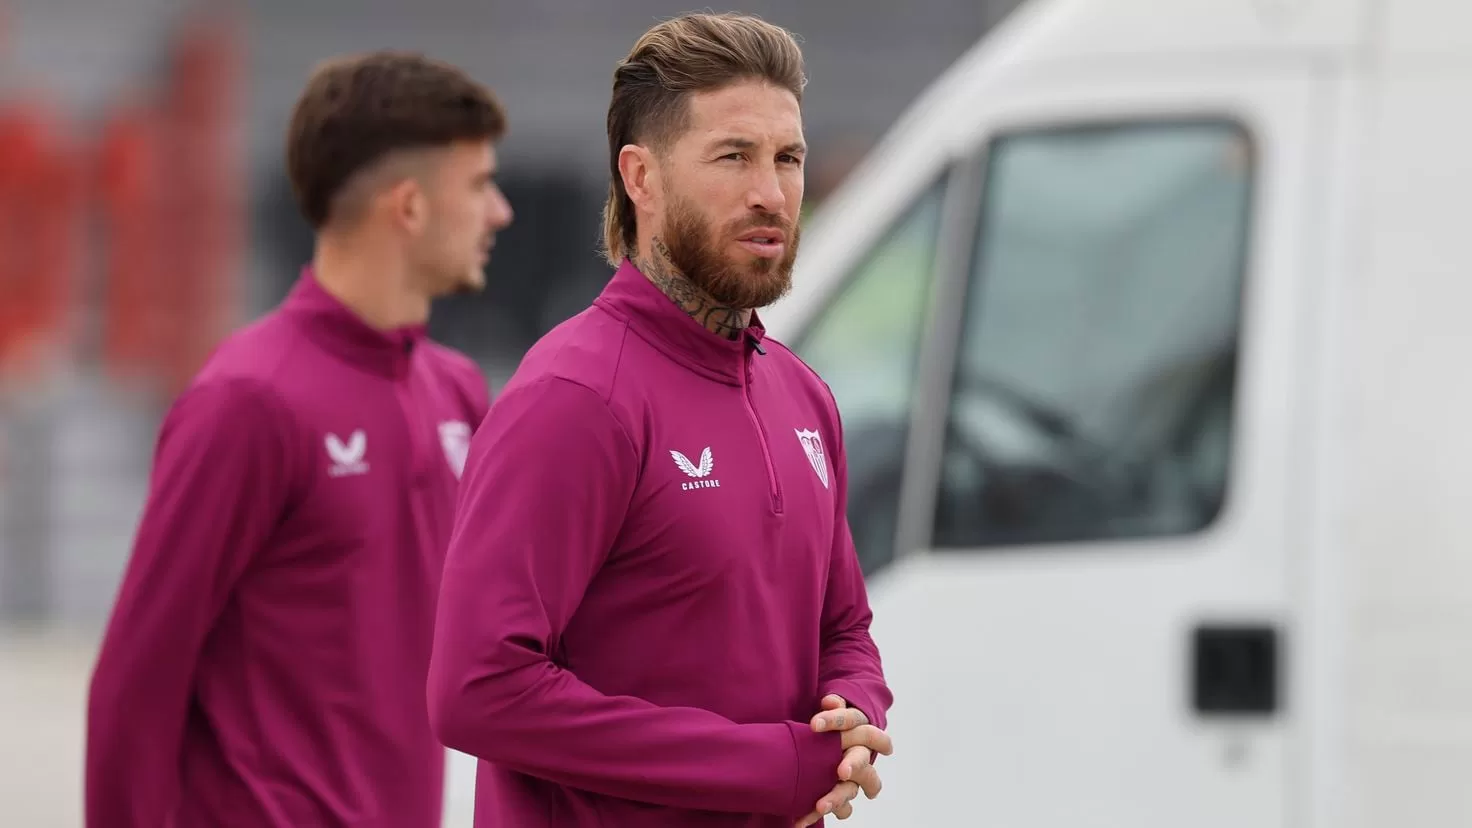 Sergio Ramos suffers a new setback in his business after accumulating losses of 4.7 million euros
